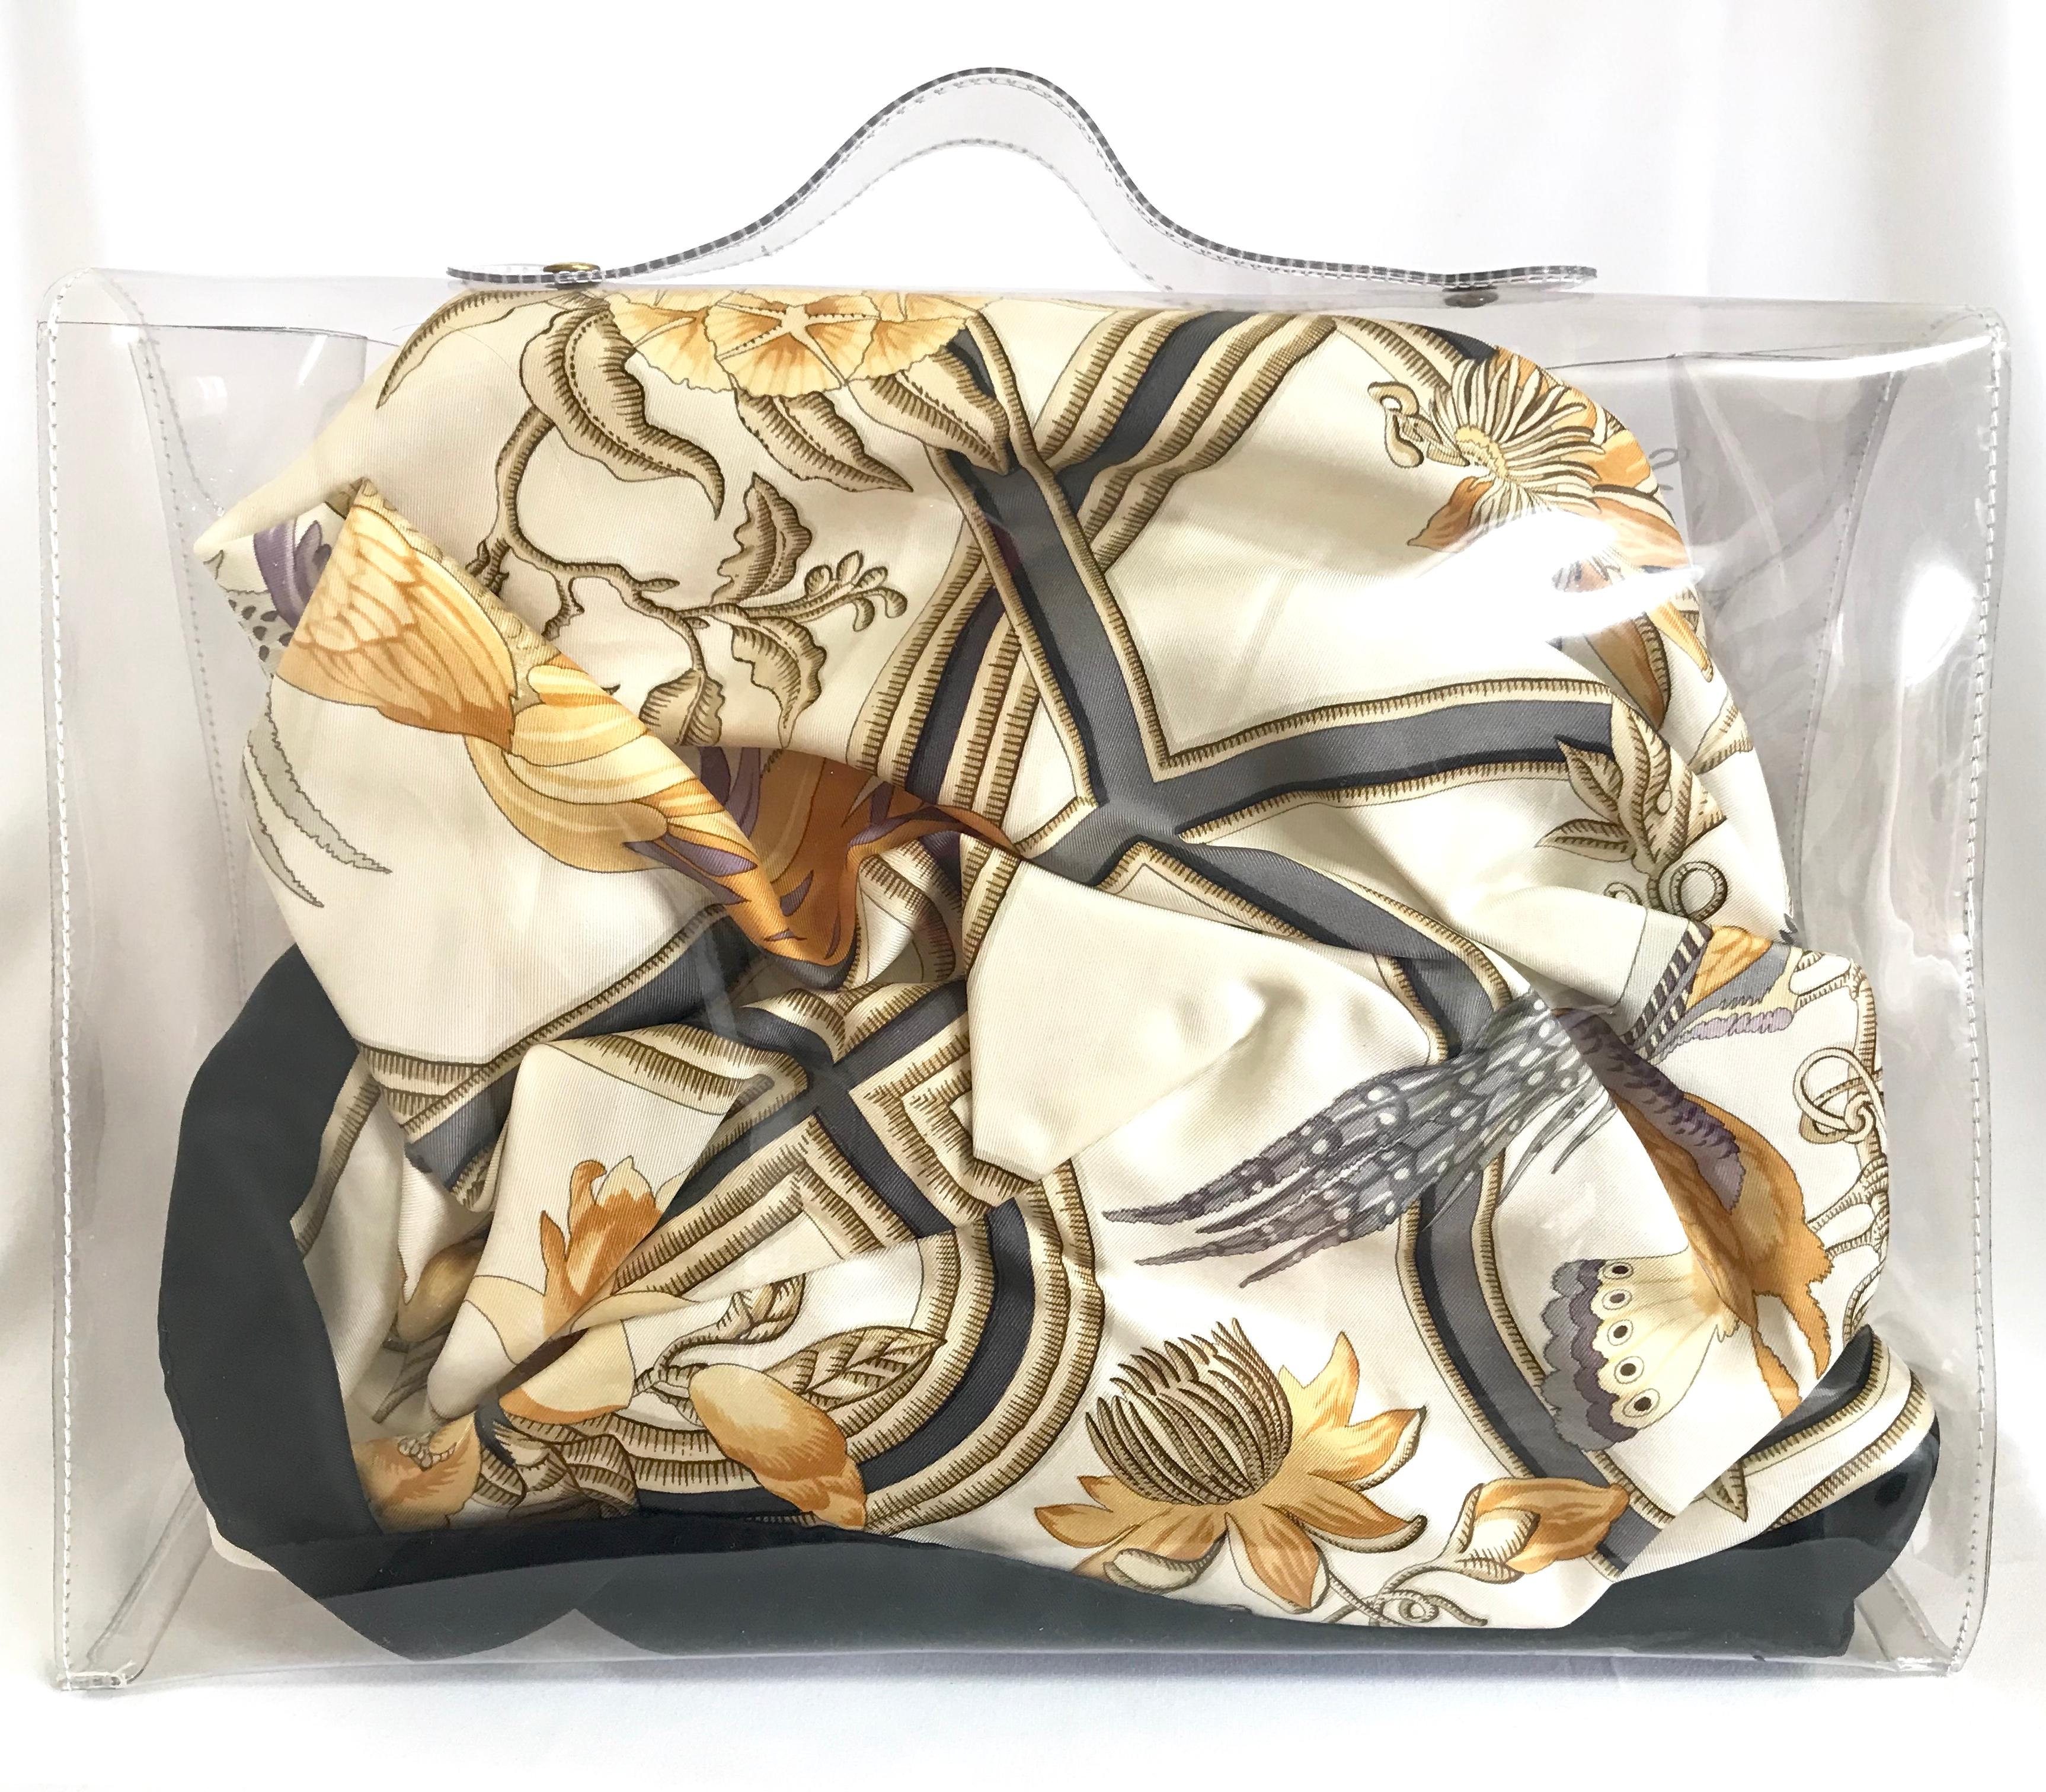 *****Please note that the scarf in the bag is for display purpose only. Not for SALE****
MINT. 1990s. Vintage Hermes rare, clear transparent vinyl Kelly bag, Japan limited Edition. 
Rare masterpiece.

The vinyl Kelly was first born in 1996 for more